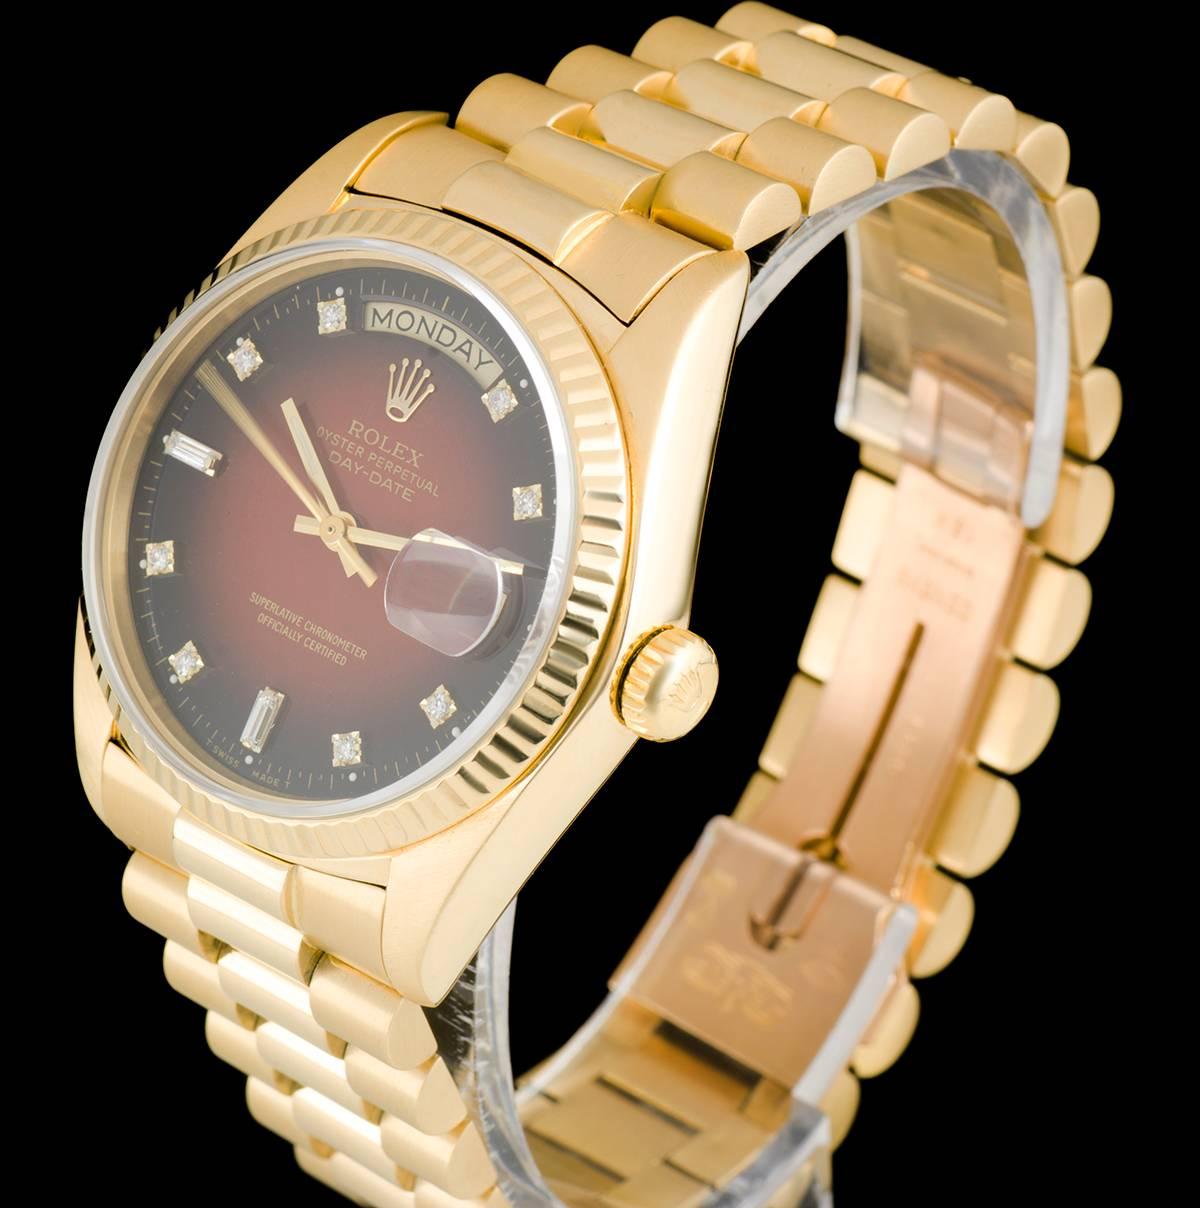 An 18k Yellow Gold Oyster Perpetual Day-Date Gents Wristwatch, maroon vignette dial with 8 applied round brilliant cut diamond hour markers and 2 baguette cut diamond hour markers, day aperture at 12 0'clock, date at 3 0'clock, a fixed 18k yellow